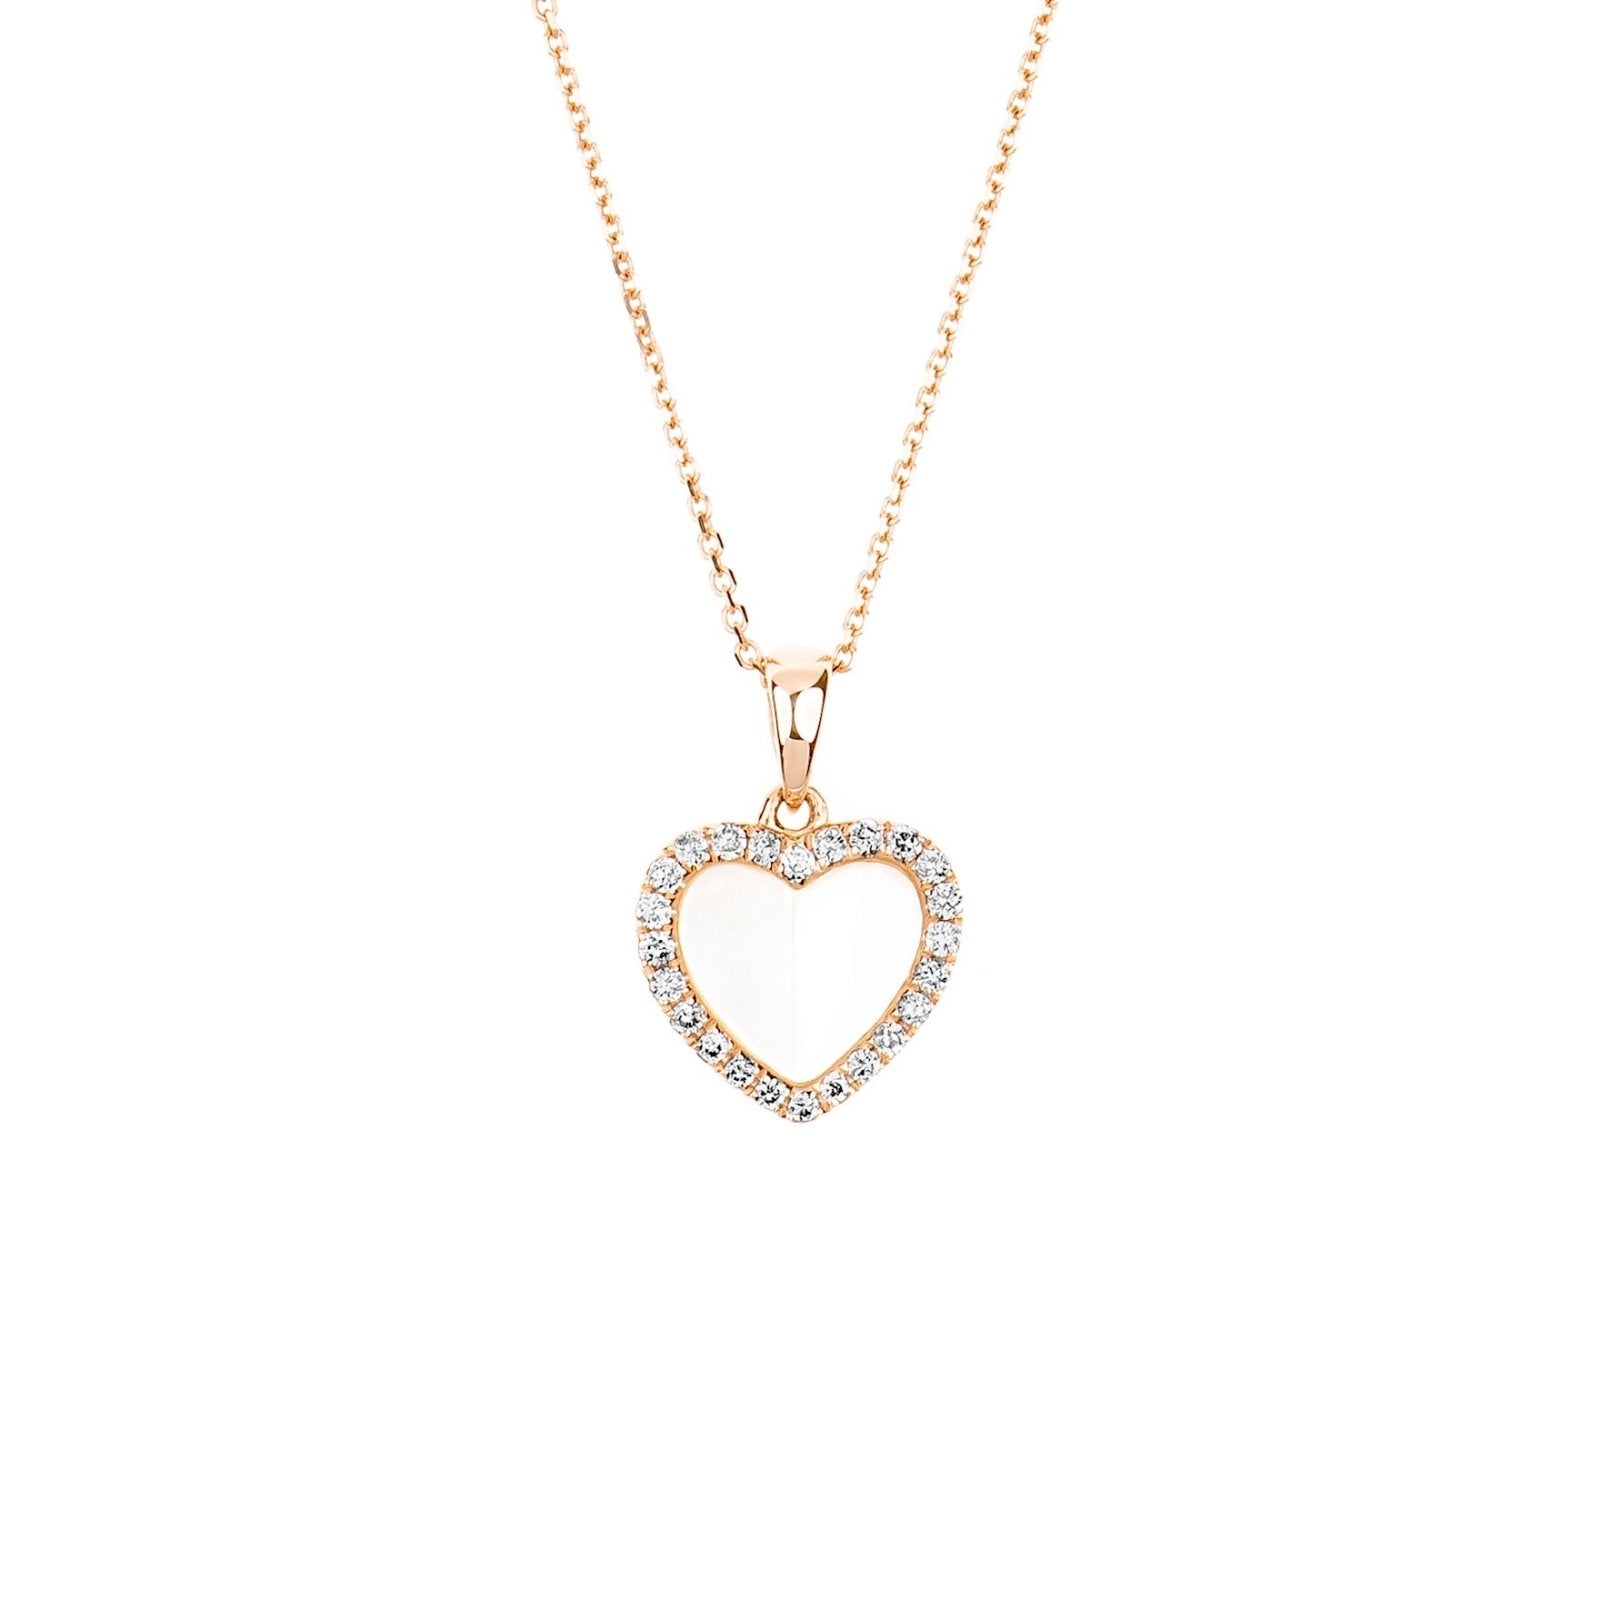 Mother of Pearl Heart with Diamond Halo Pendant Necklace Necklaces Estella Collection #product_description# 17212 14k Birthstone Diamond #tag4# #tag5# #tag6# #tag7# #tag8# #tag9# #tag10#